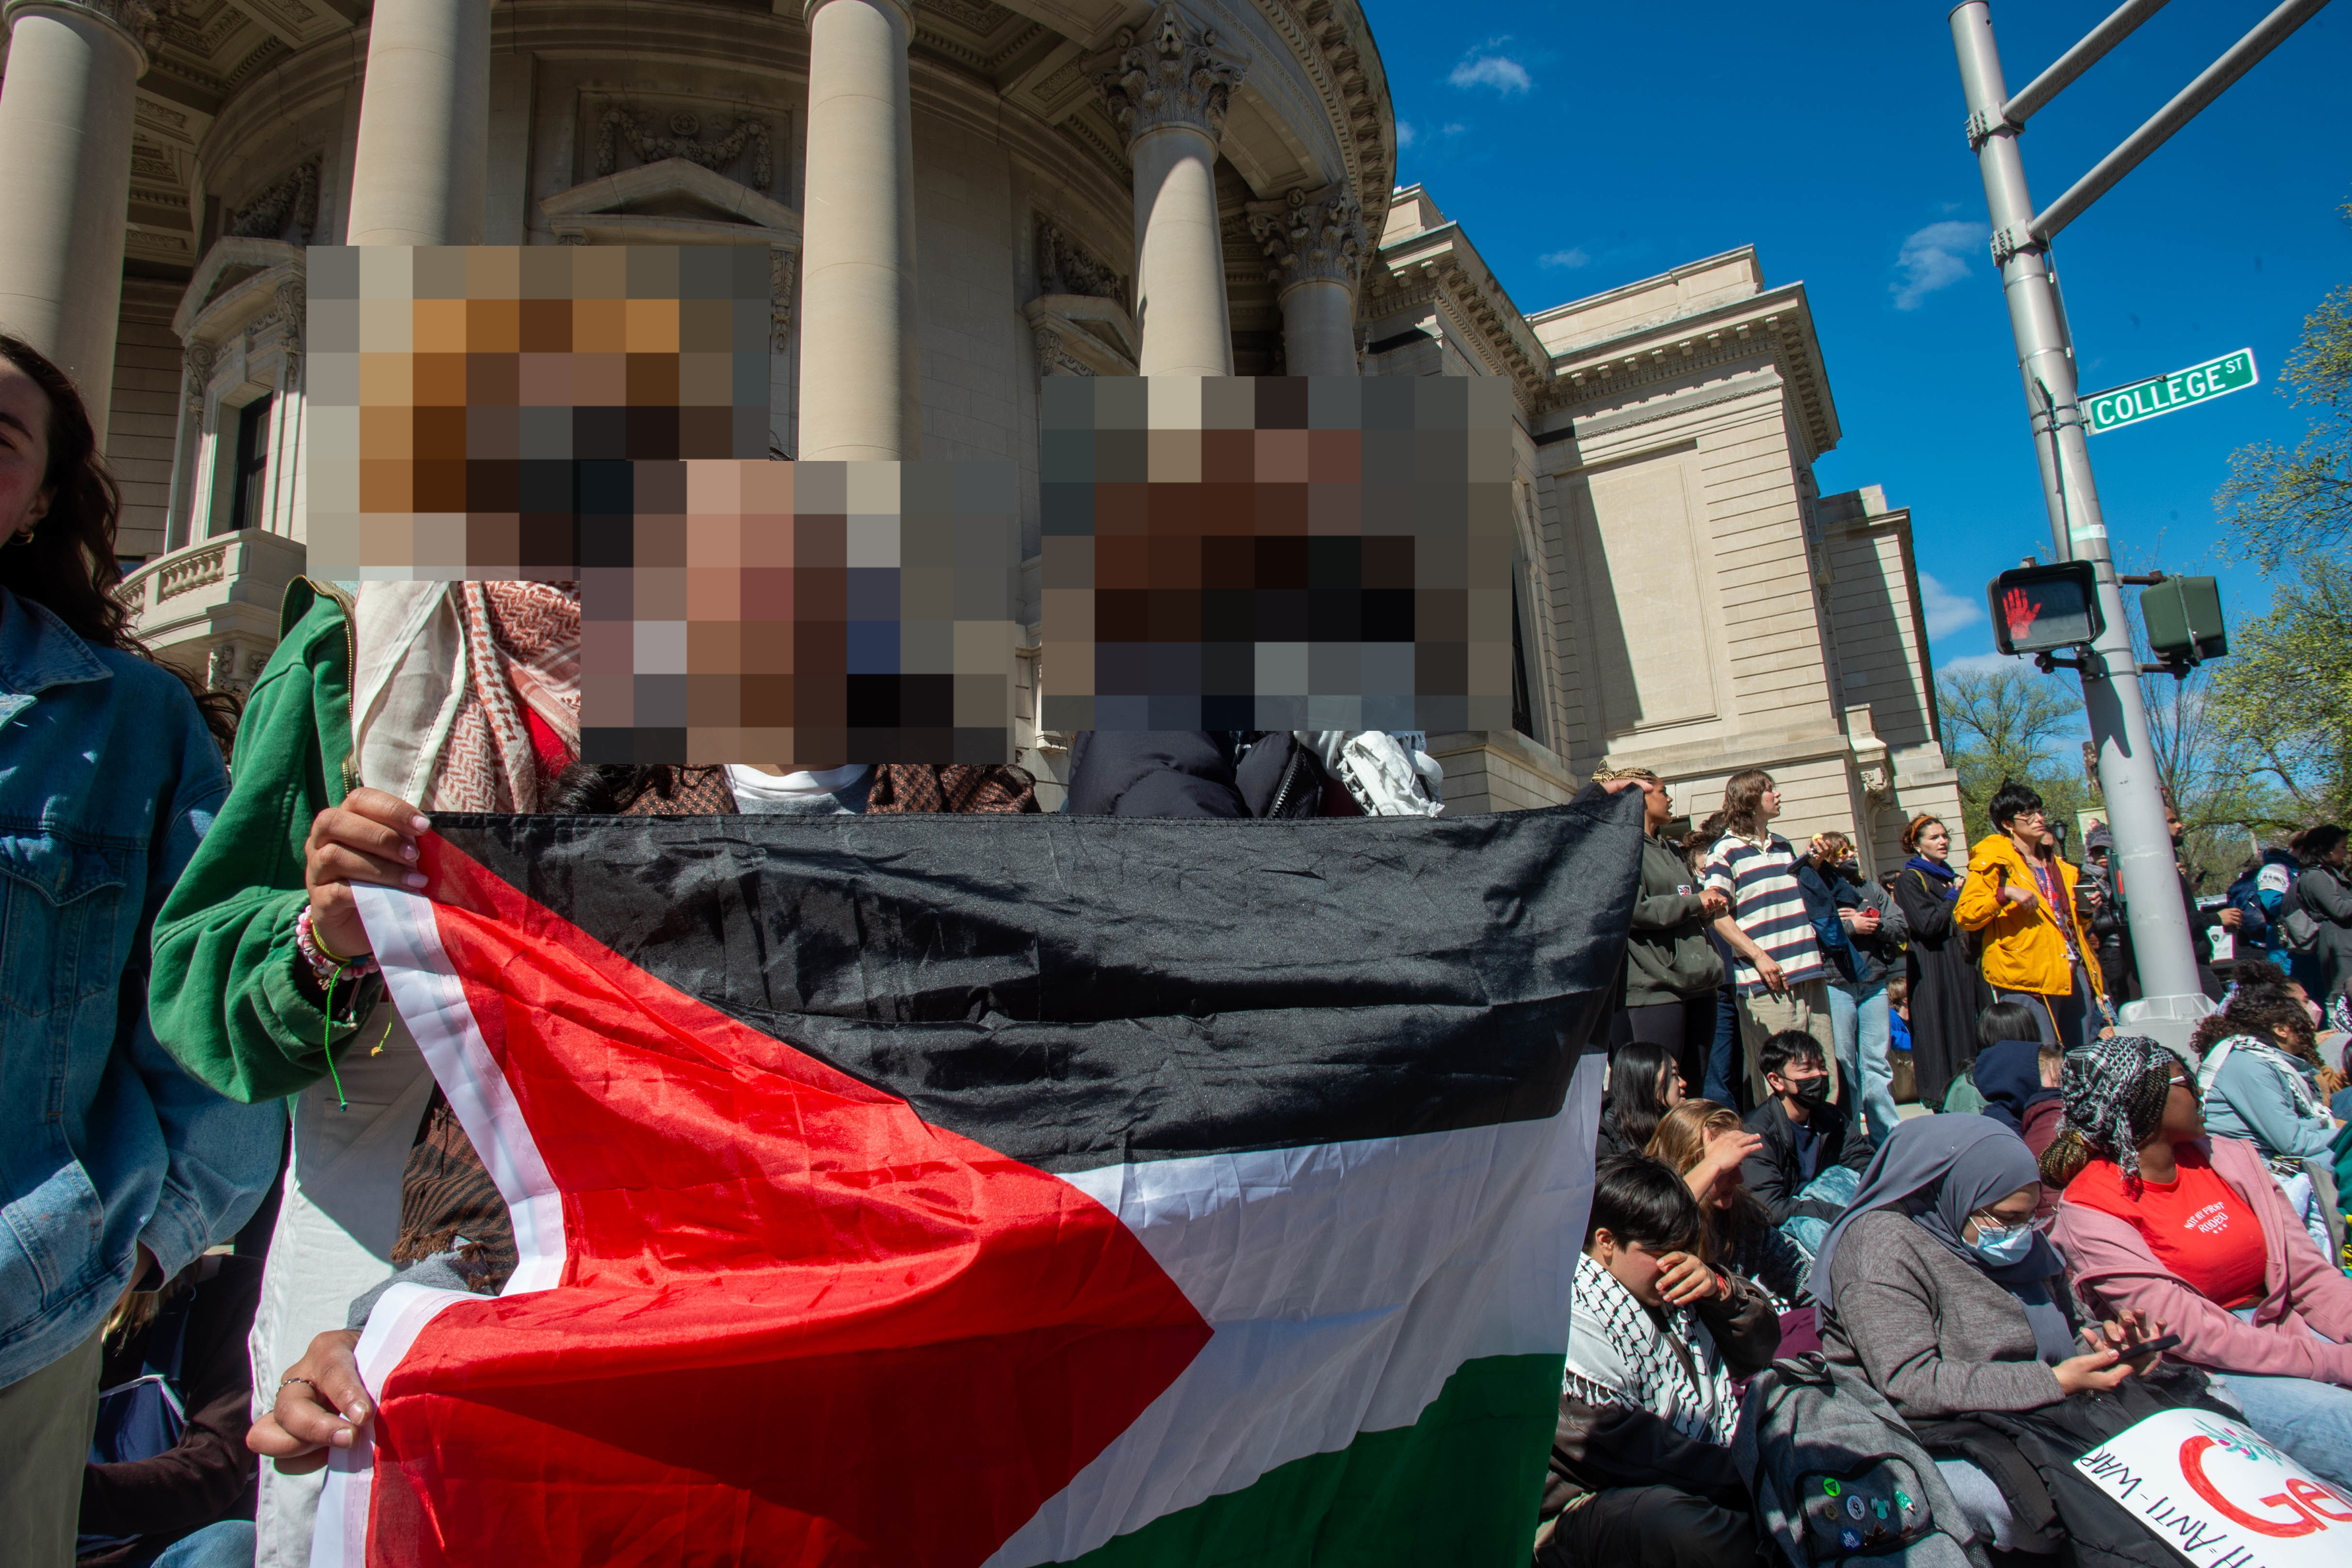 Protestors with a Palestinian flag in front of a building, expressing solidarity or demonstrating